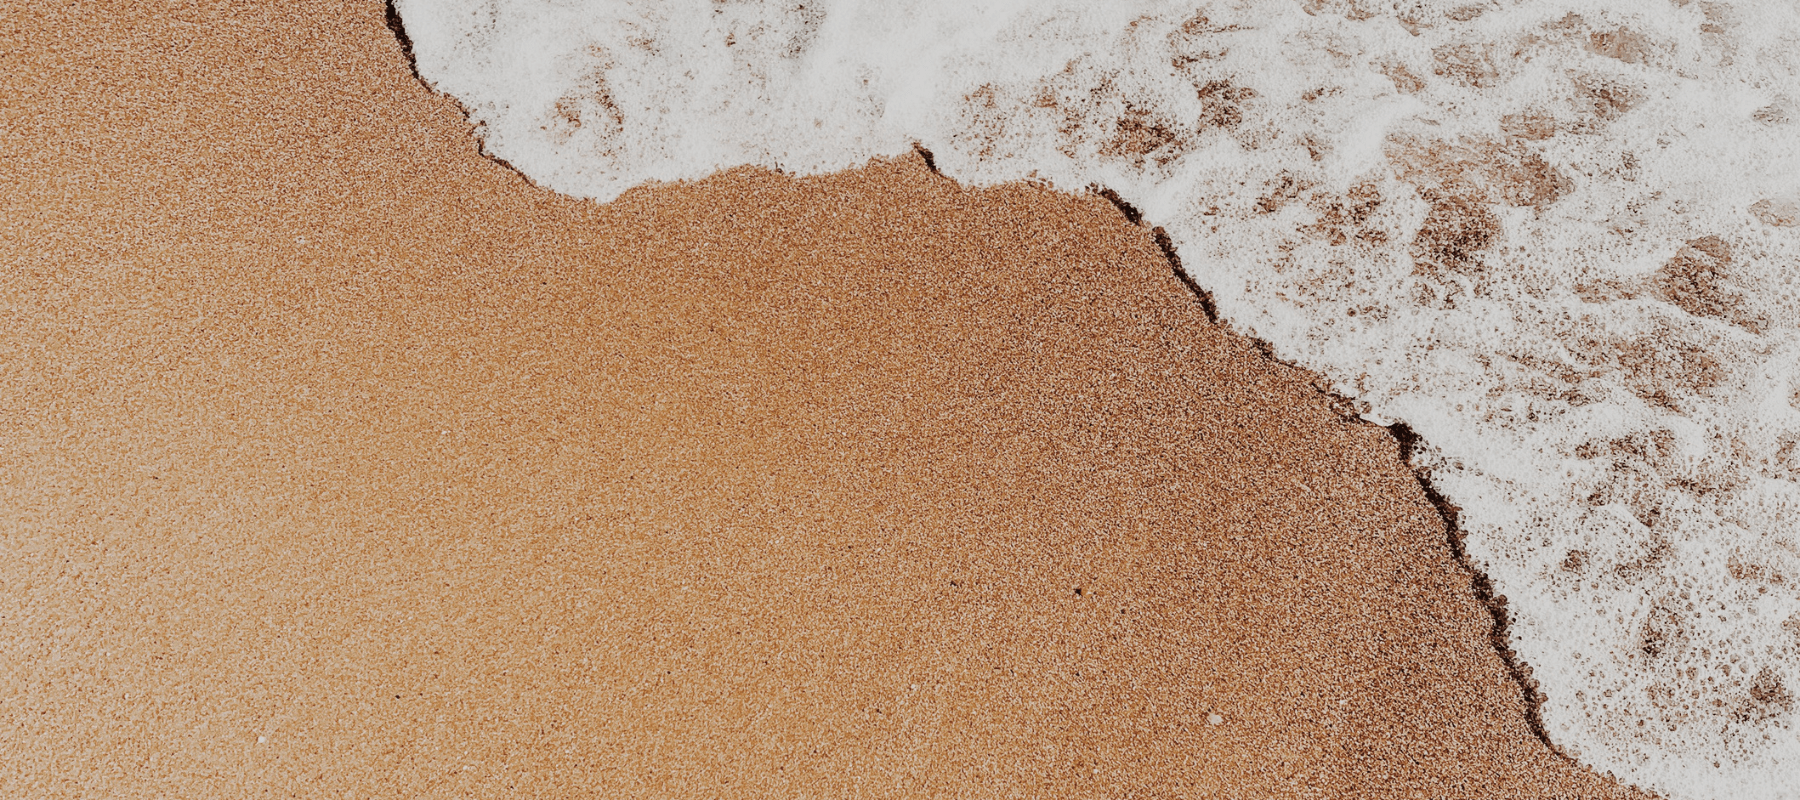 Close-up view of ocean waves gently washing over golden sand, symbolizing the flow of knowledge and insights